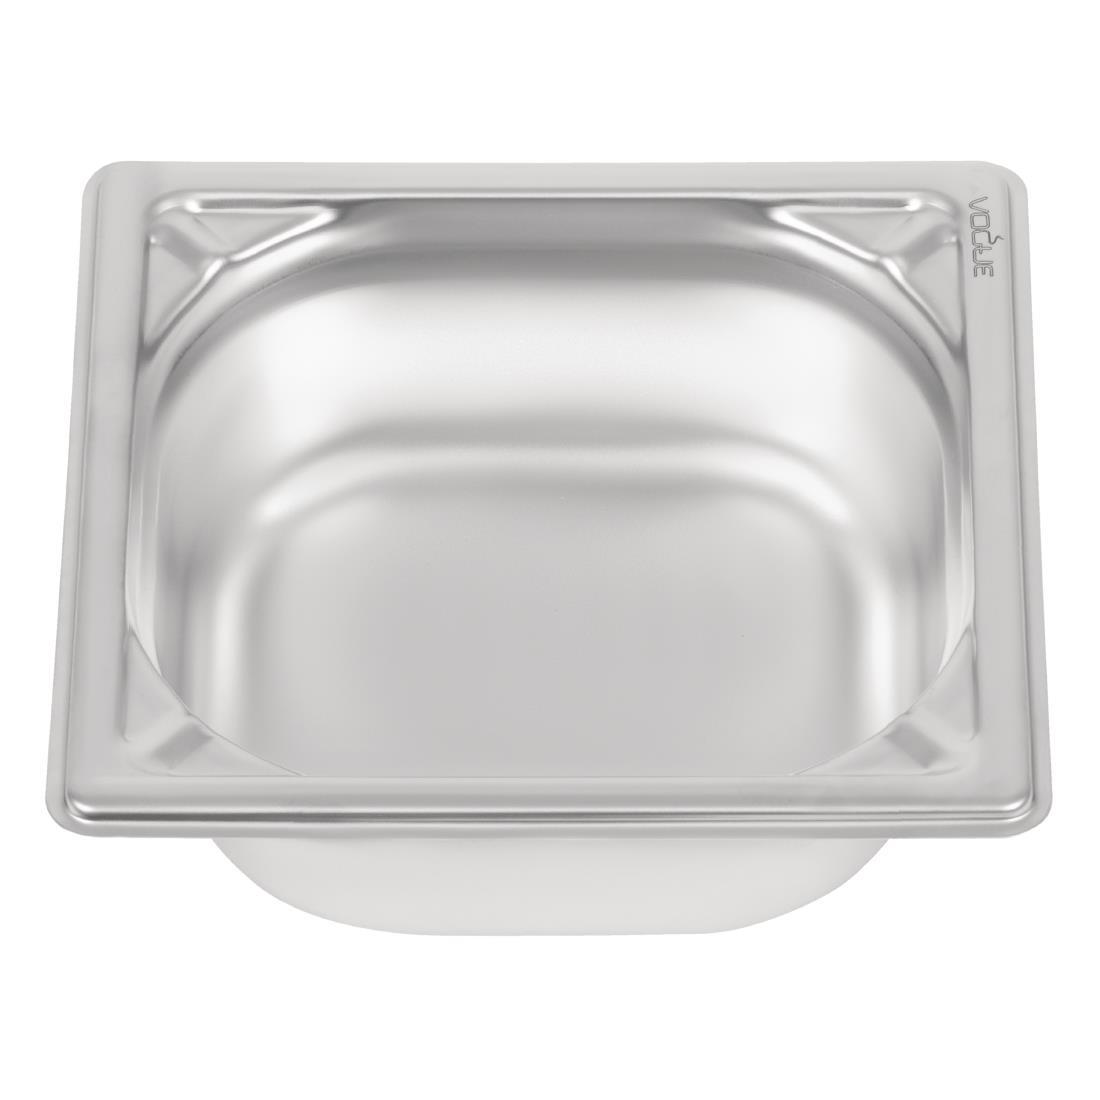 Vogue Heavy Duty Stainless Steel 1/6 Gastronorm Pan 65mm - DW449  - 3